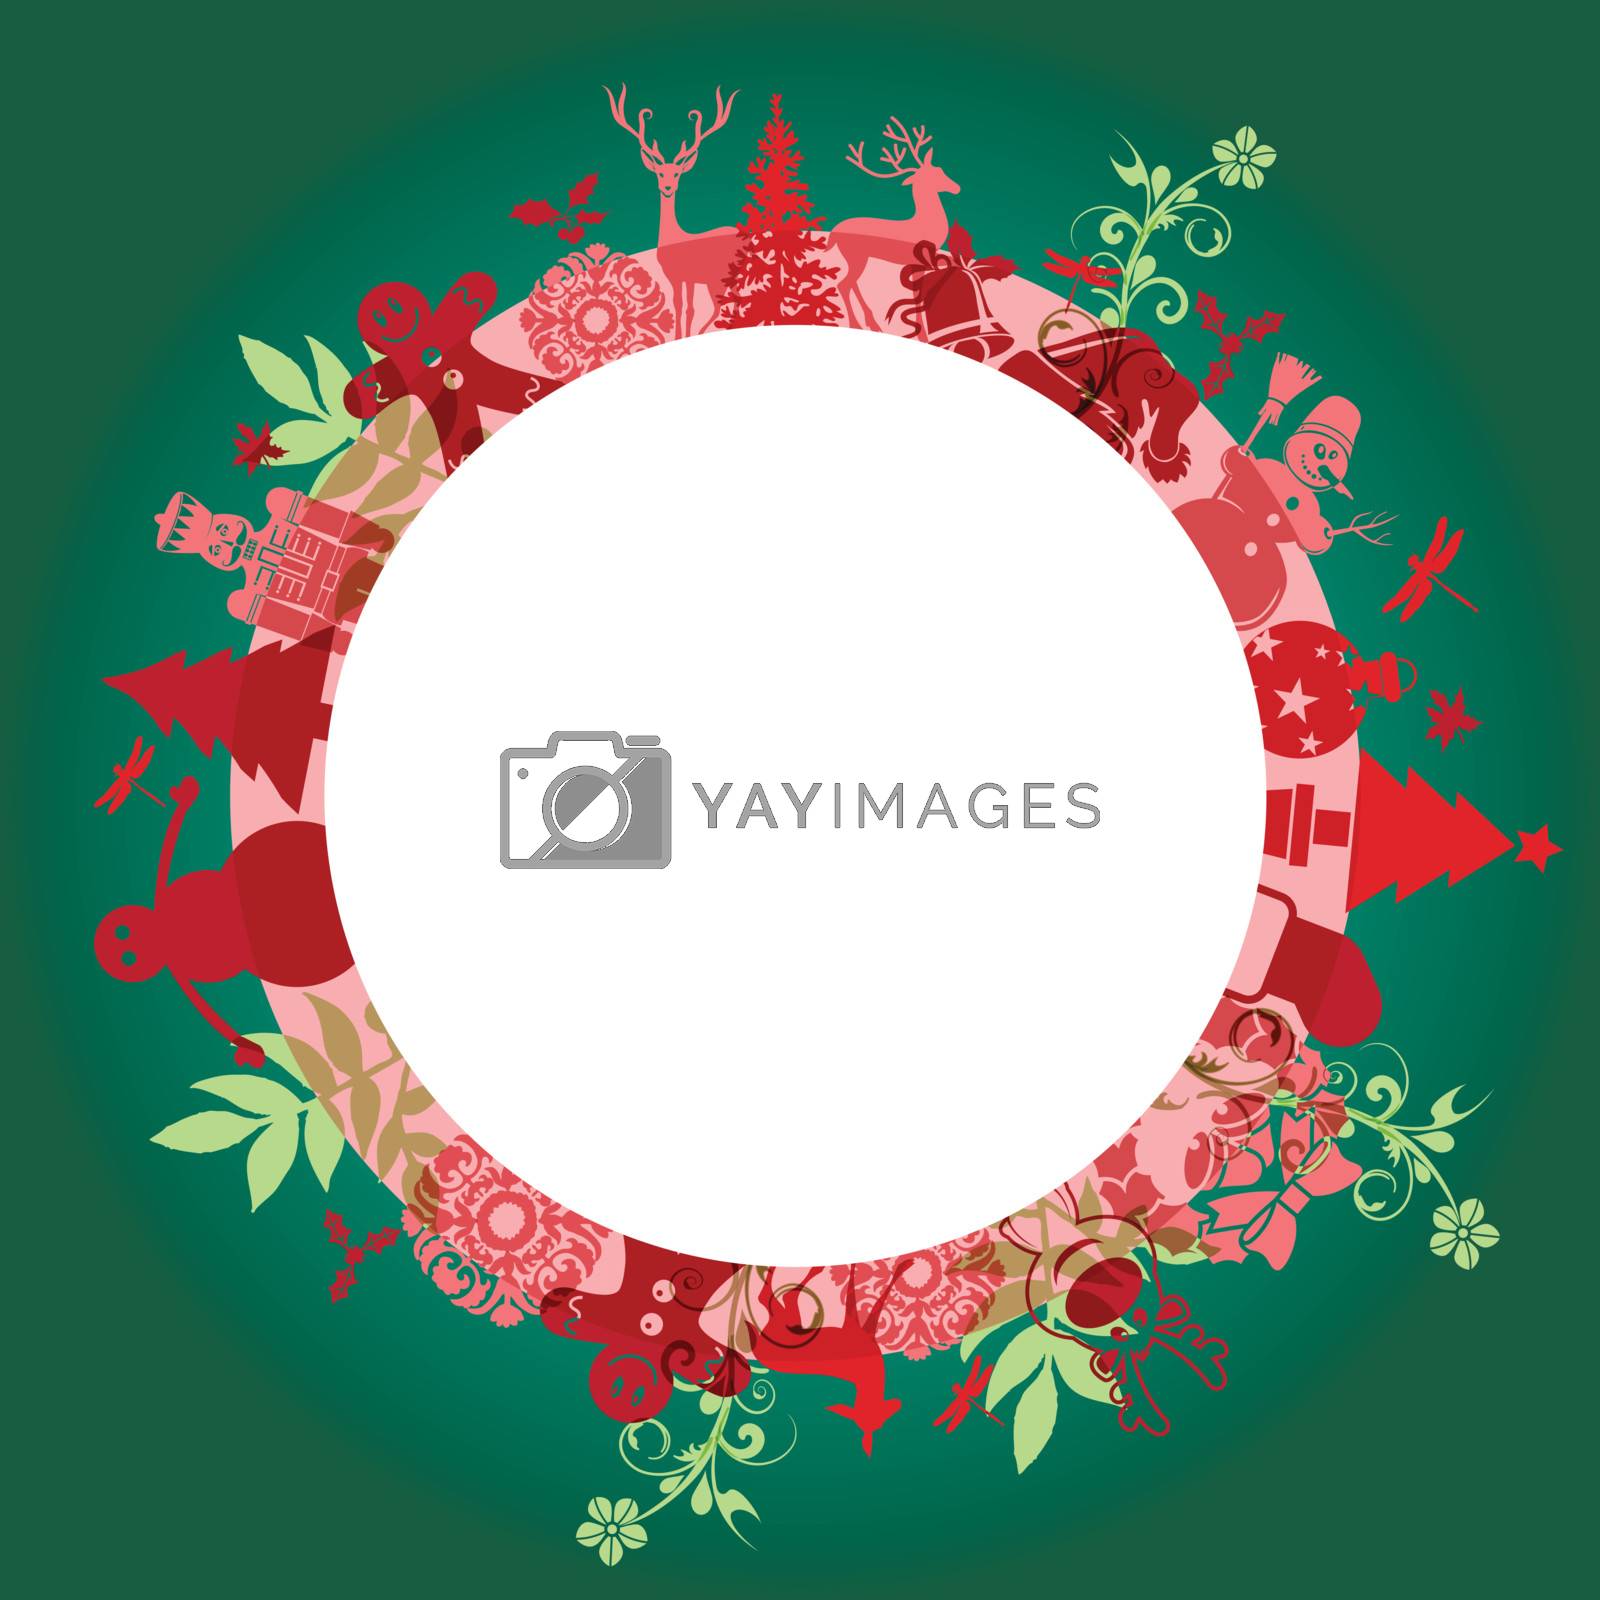 Royalty free image of Christmas set by nirots